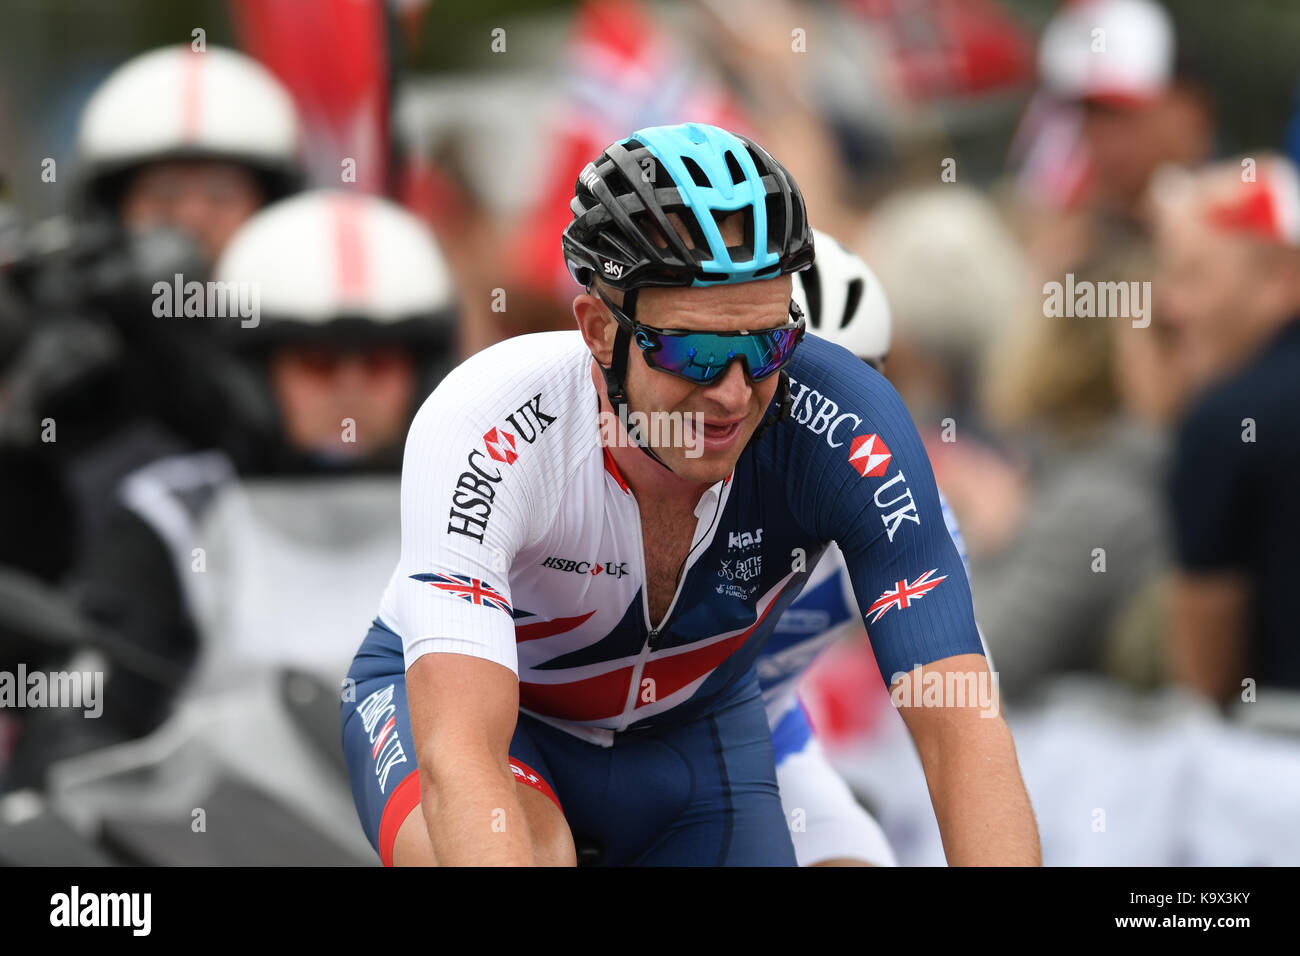 Bergen, Norway. 24th September, 2017. Ian Stannard of Great Britan struggled in the final laps and had to settle for a DNF in the race eventually. Credit: Kjell Eirik Irgens Henanger/Alamy Live News Stock Photo